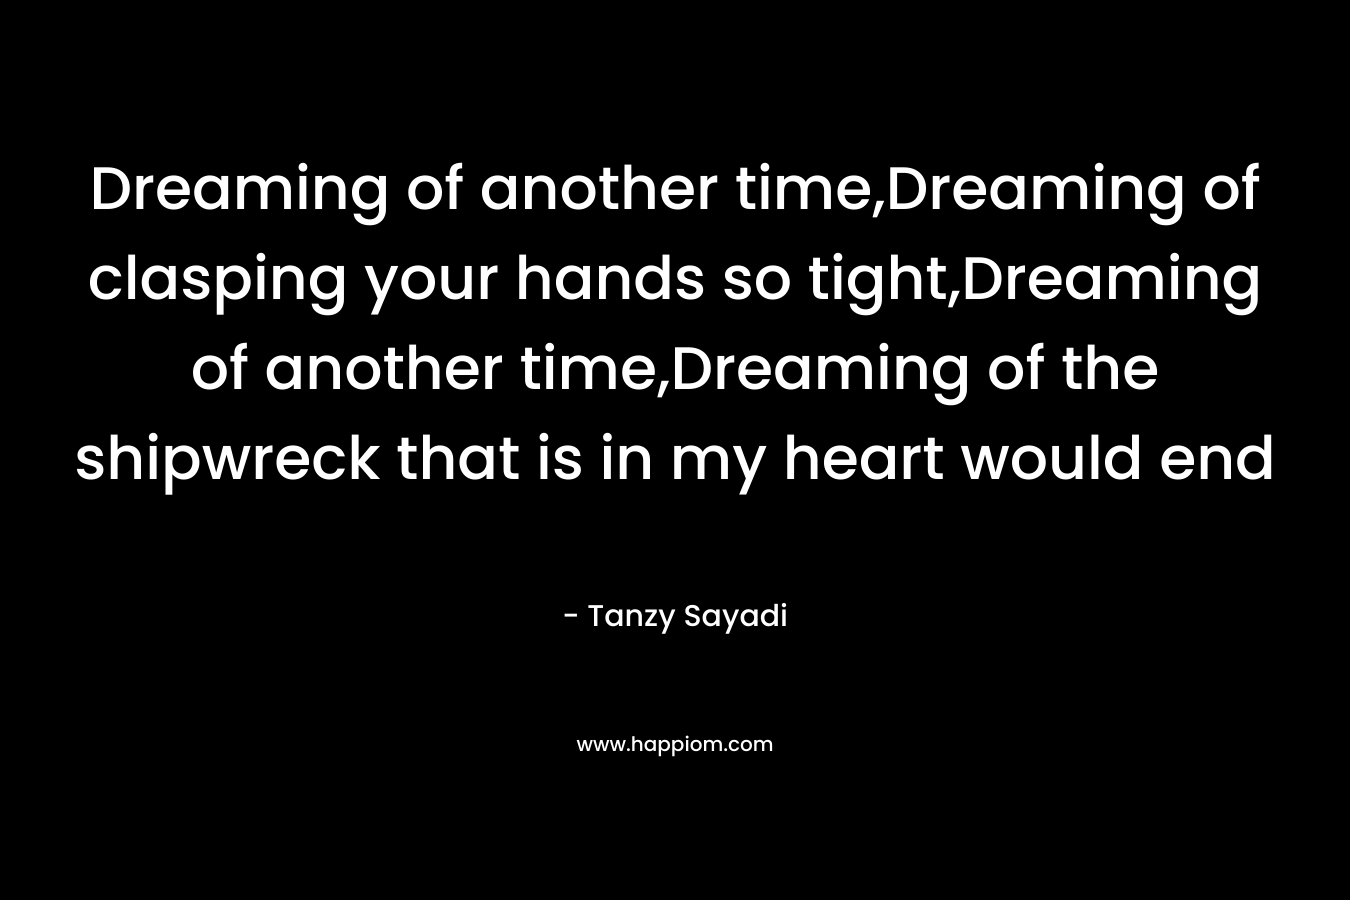 Dreaming of another time,Dreaming of clasping your hands so tight,Dreaming of another time,Dreaming of the shipwreck that is in my heart would end – Tanzy Sayadi